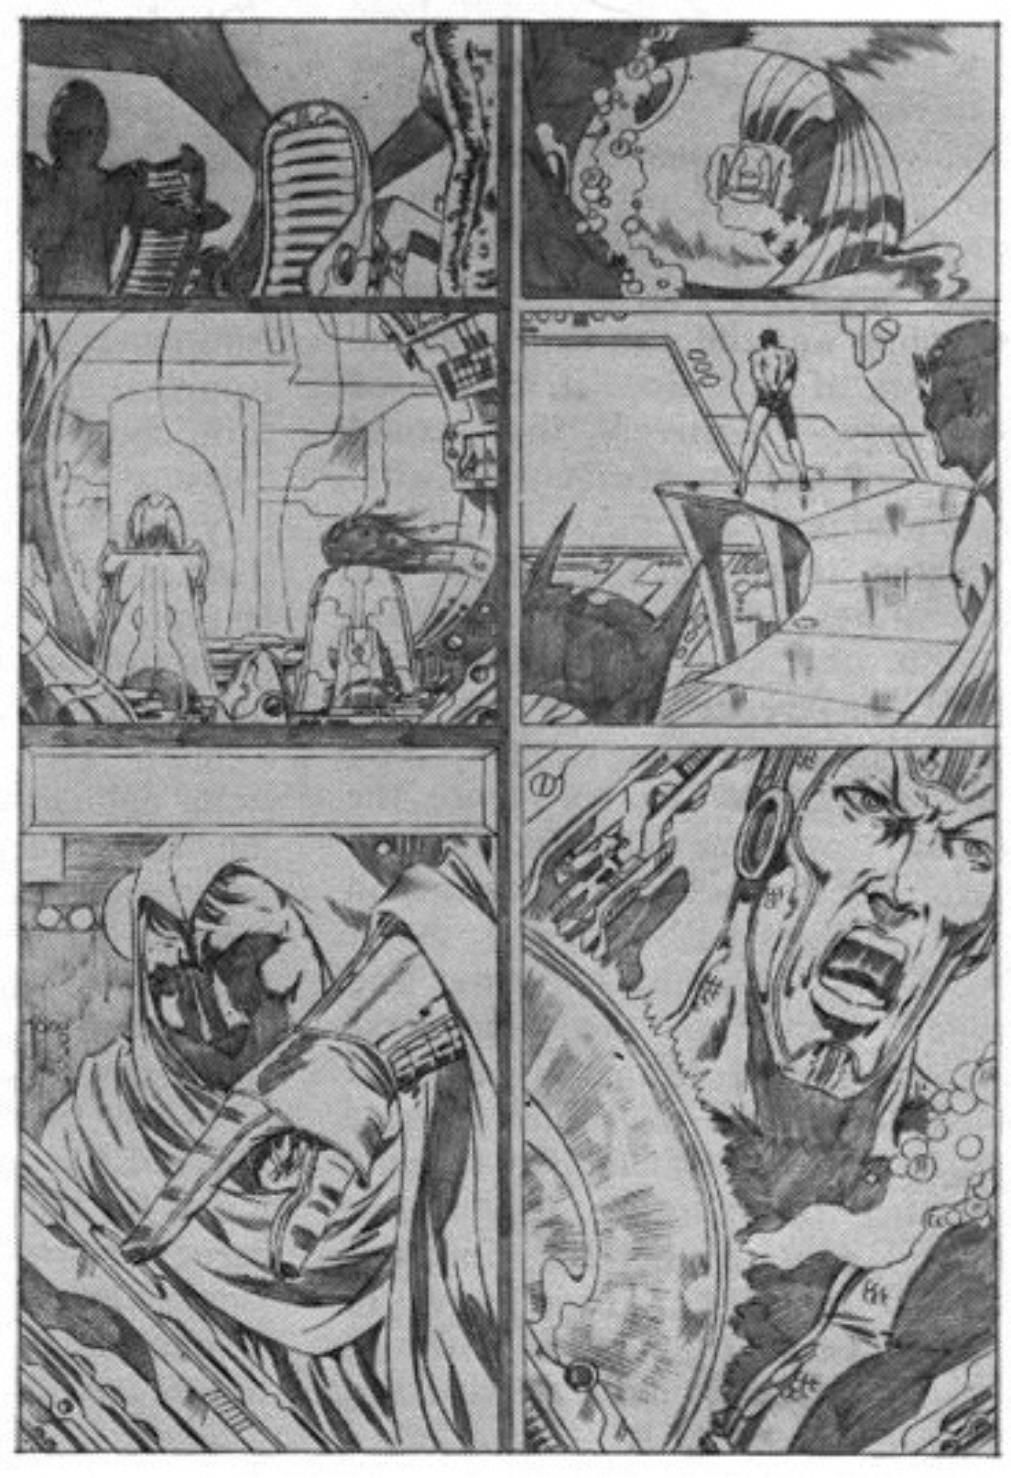 Keith Giffen's version of Michael Golden's attempt at a Defenders page